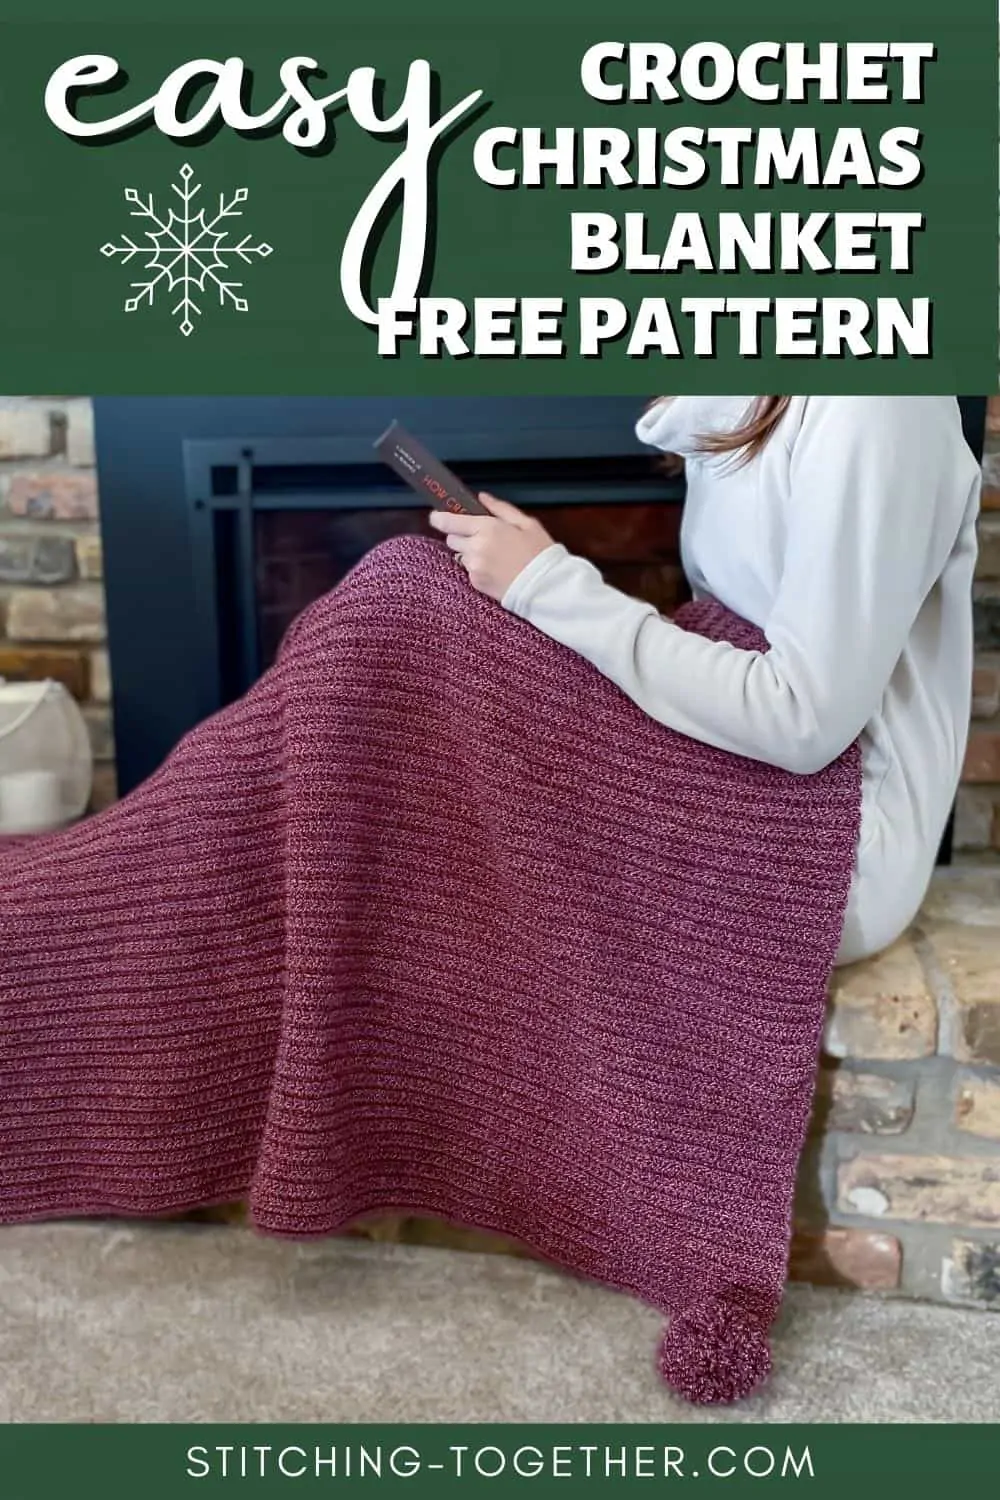 pin image of a christmas crochet throw on a lady